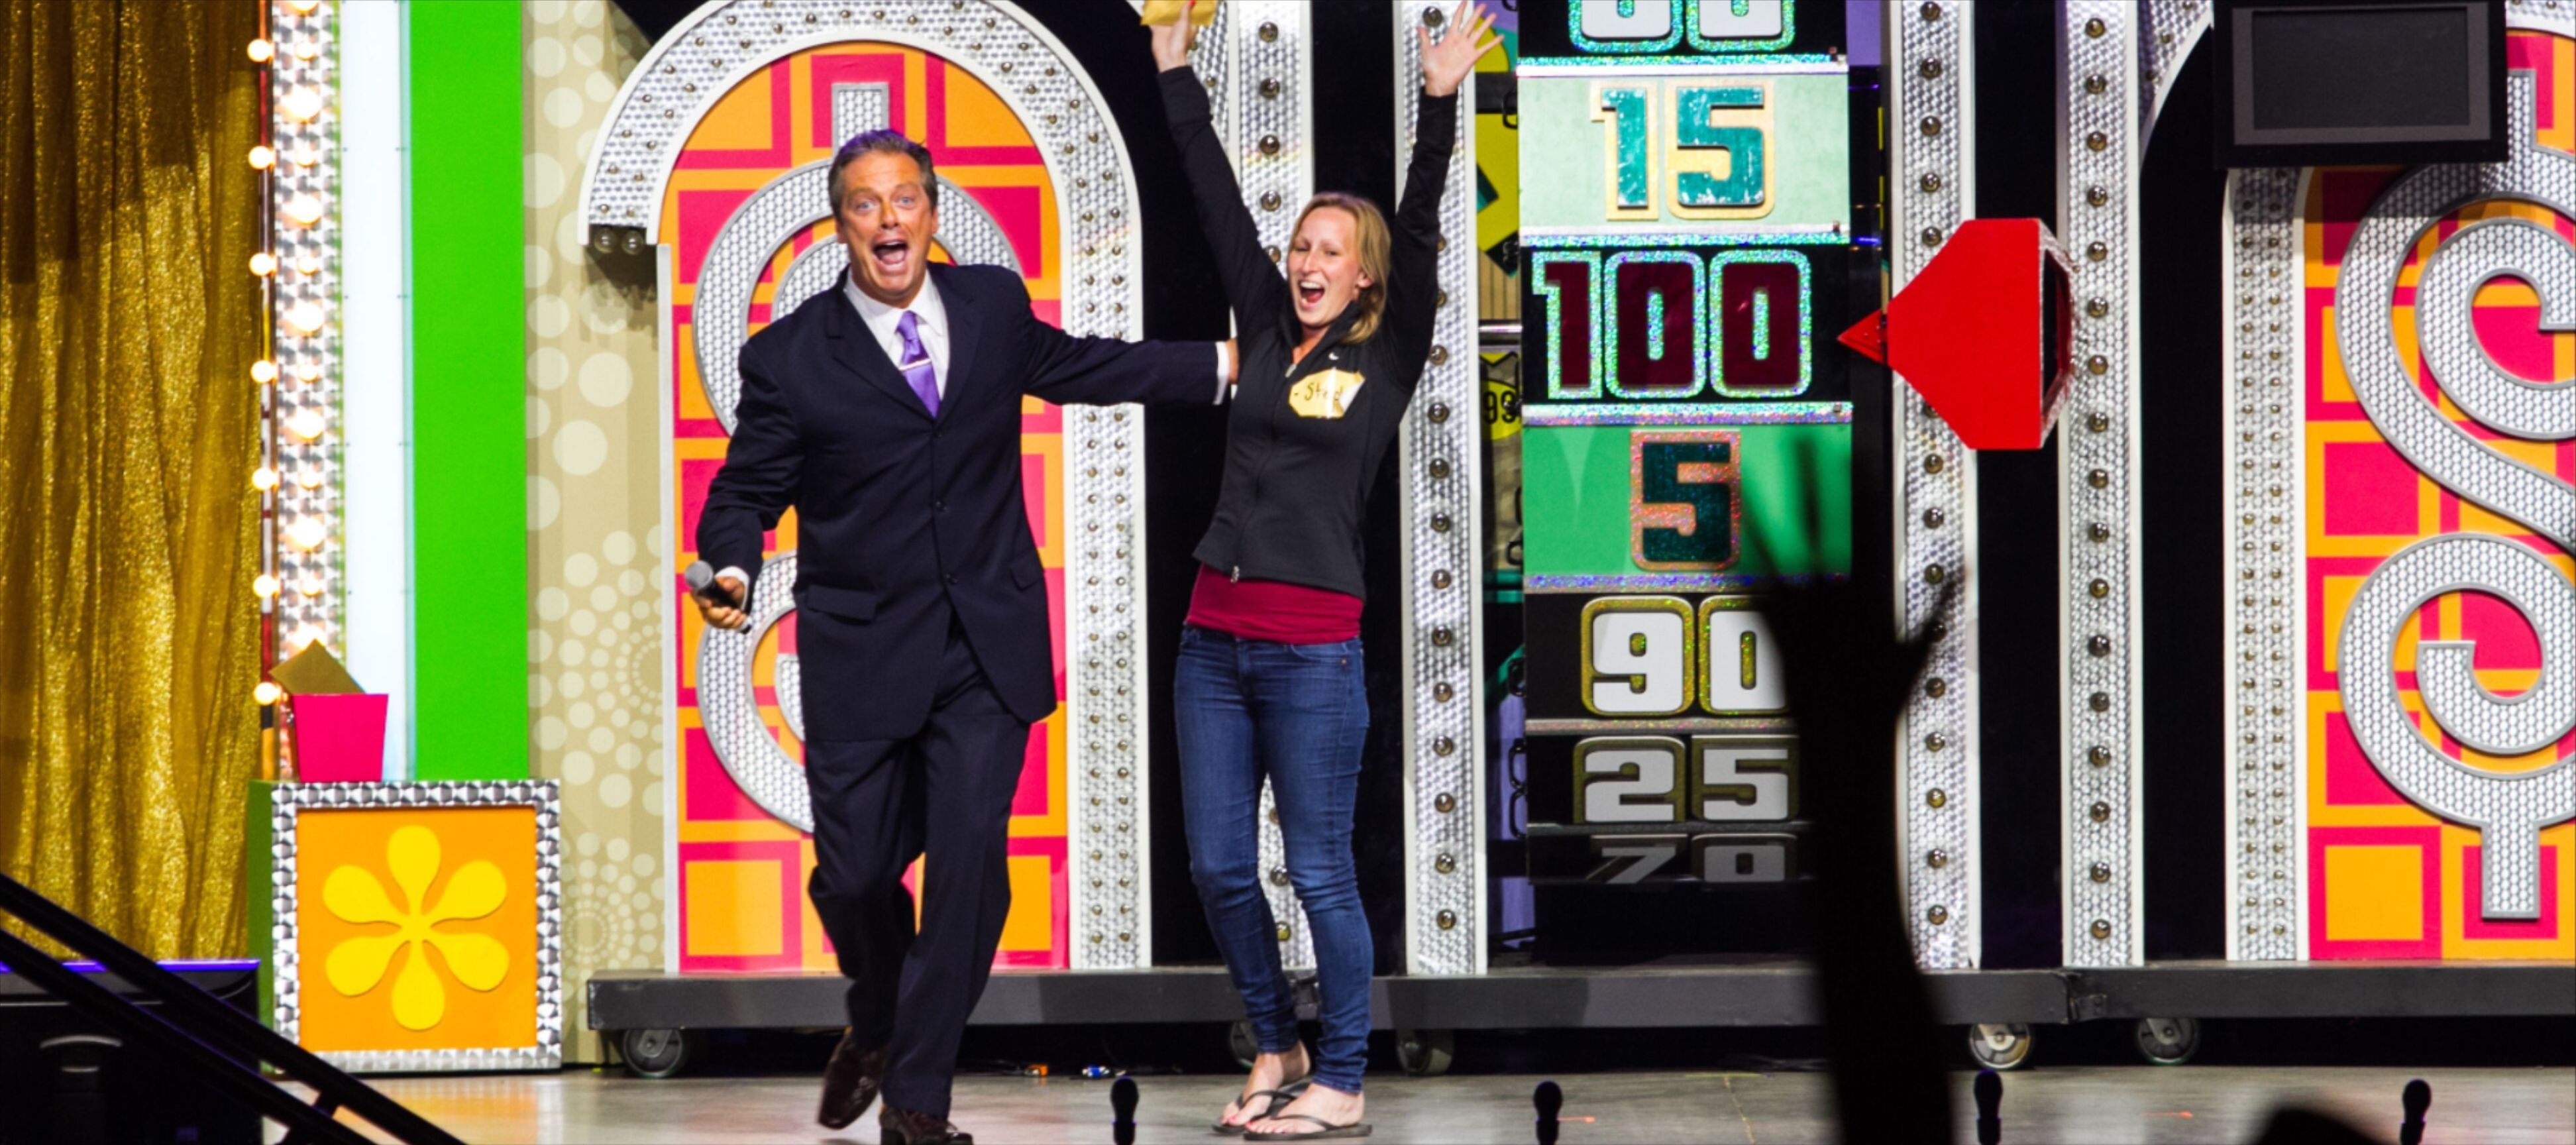 The Price is Right Live - On Stage